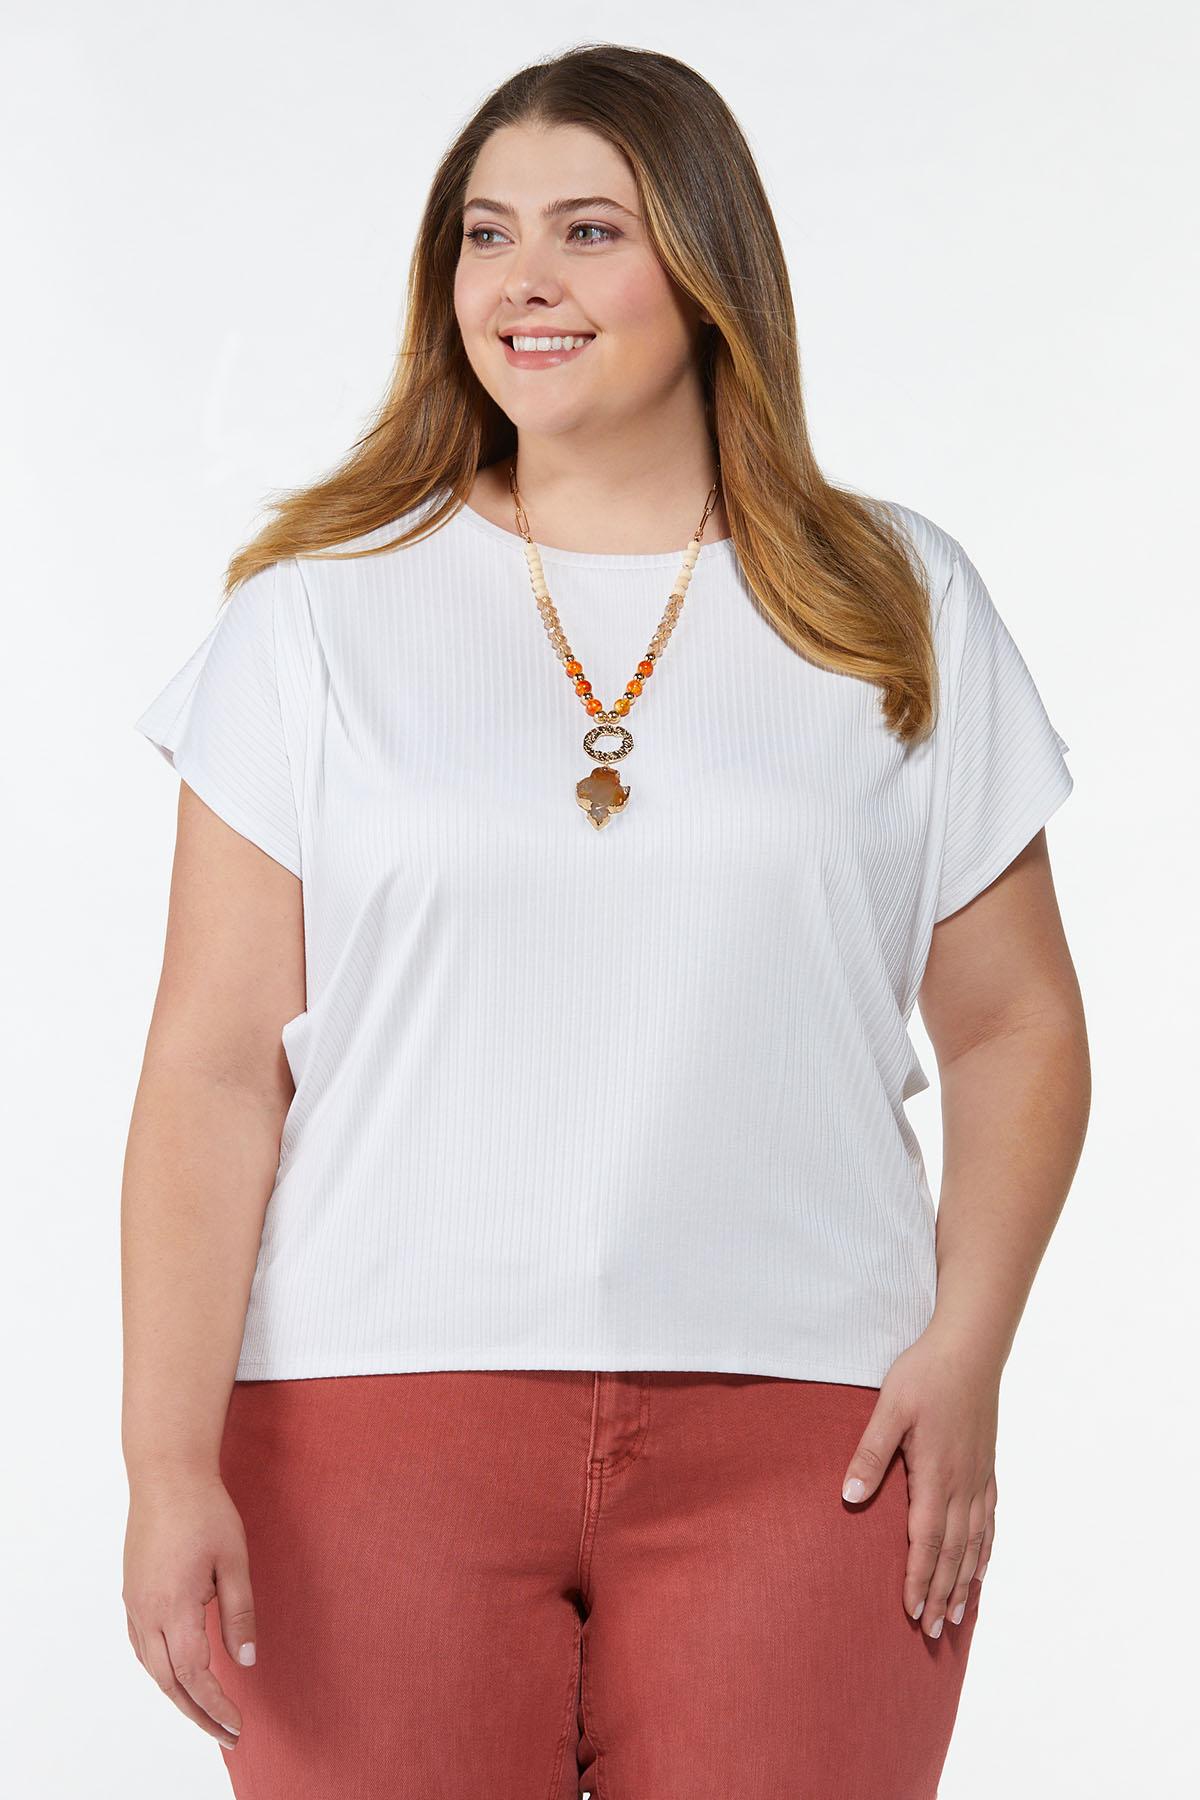 Plus Size Side Cinched Top